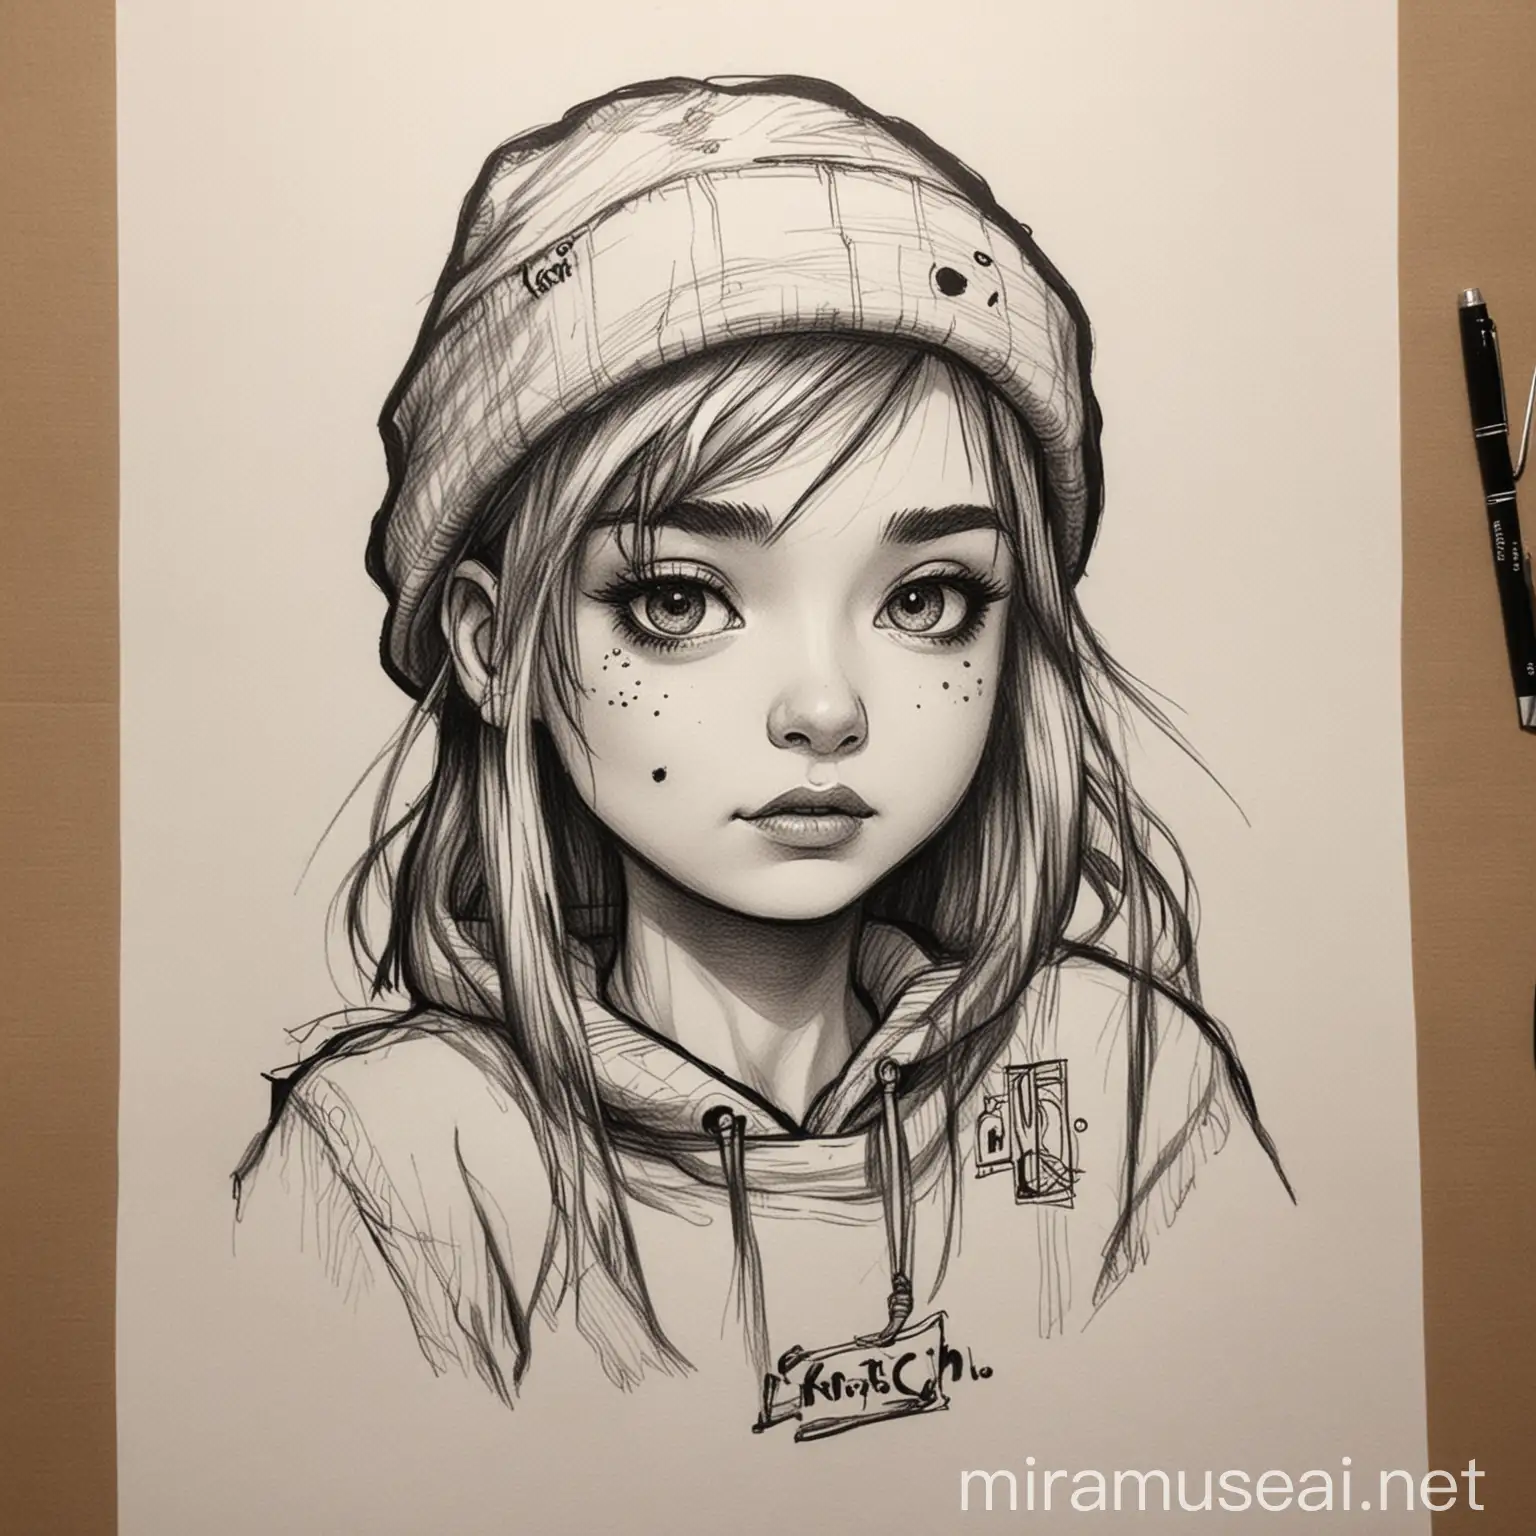 Girl Sketch Design Hand Drawing of a Girl